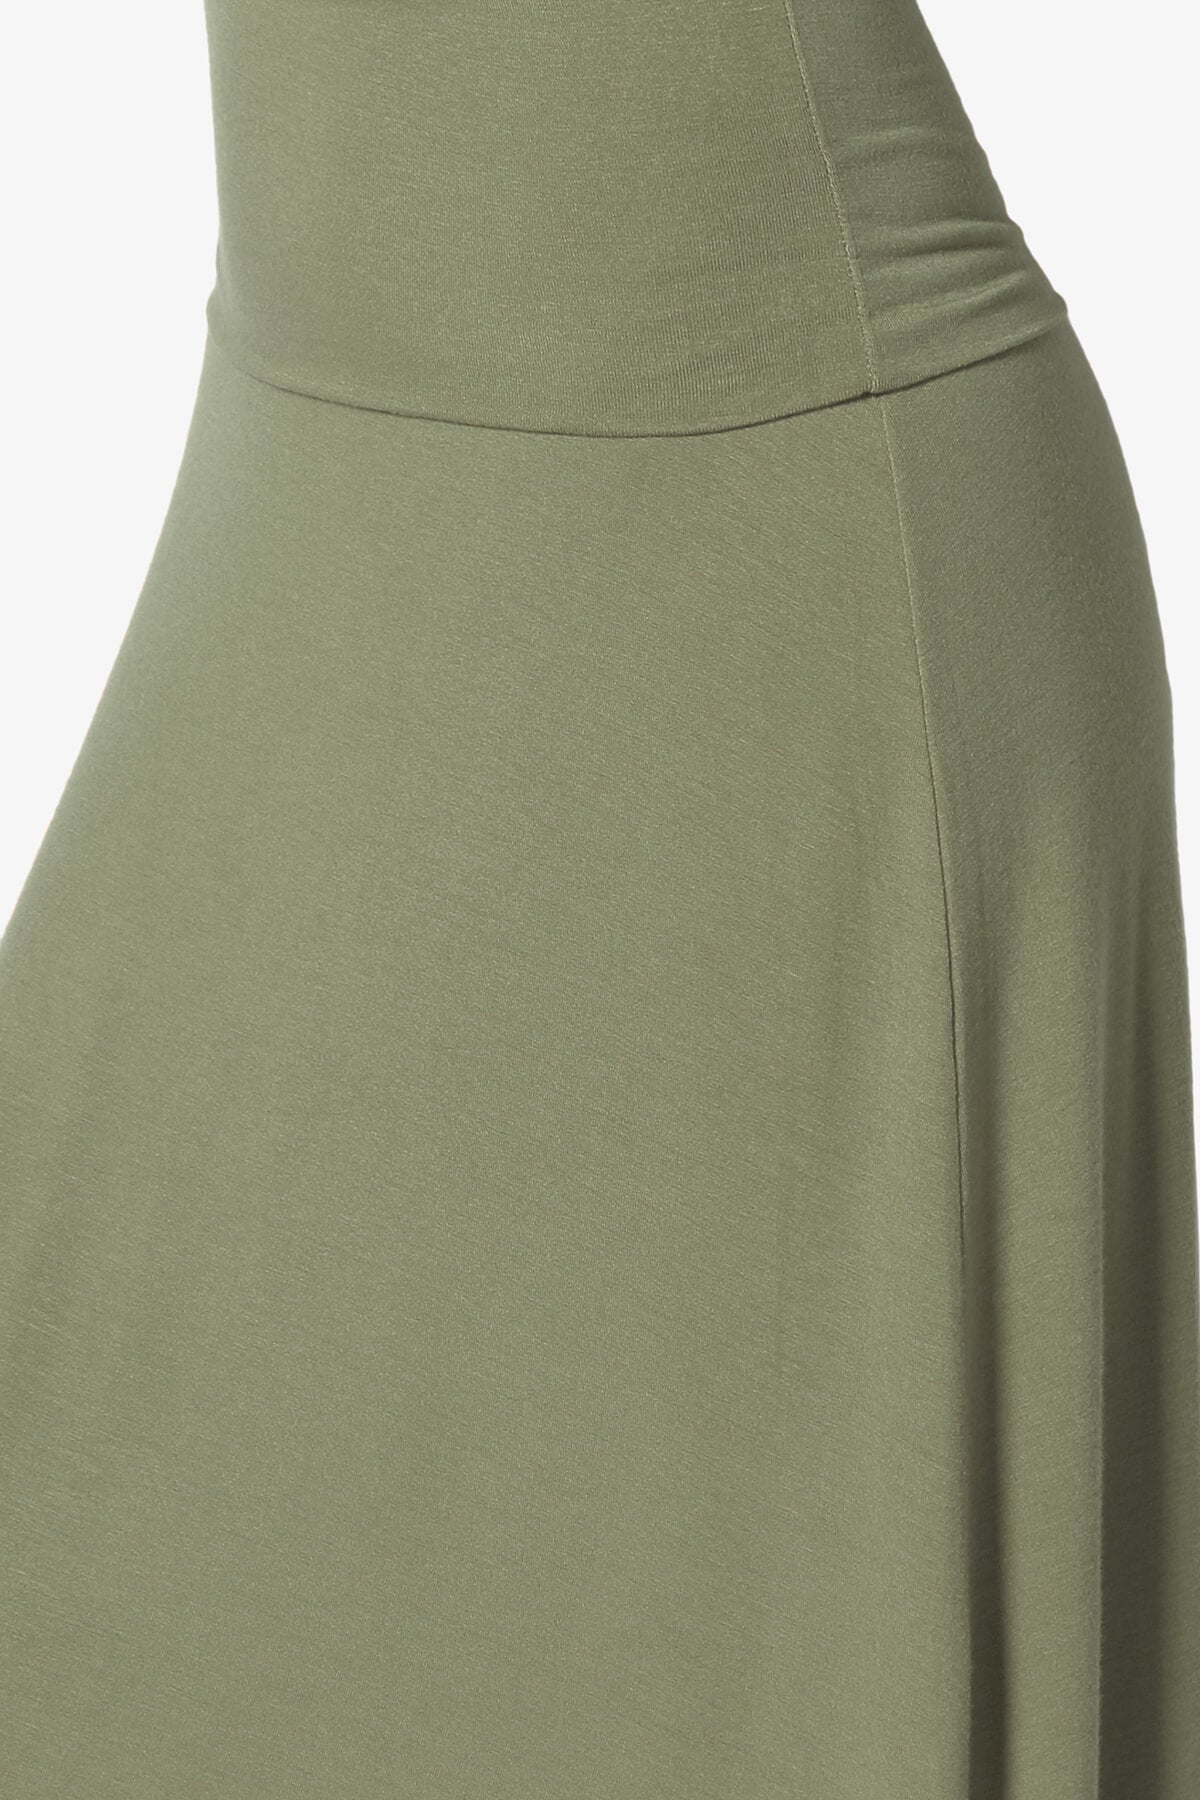 Marlow Jersey Maxi Skirt DUSTY OLIVE_5